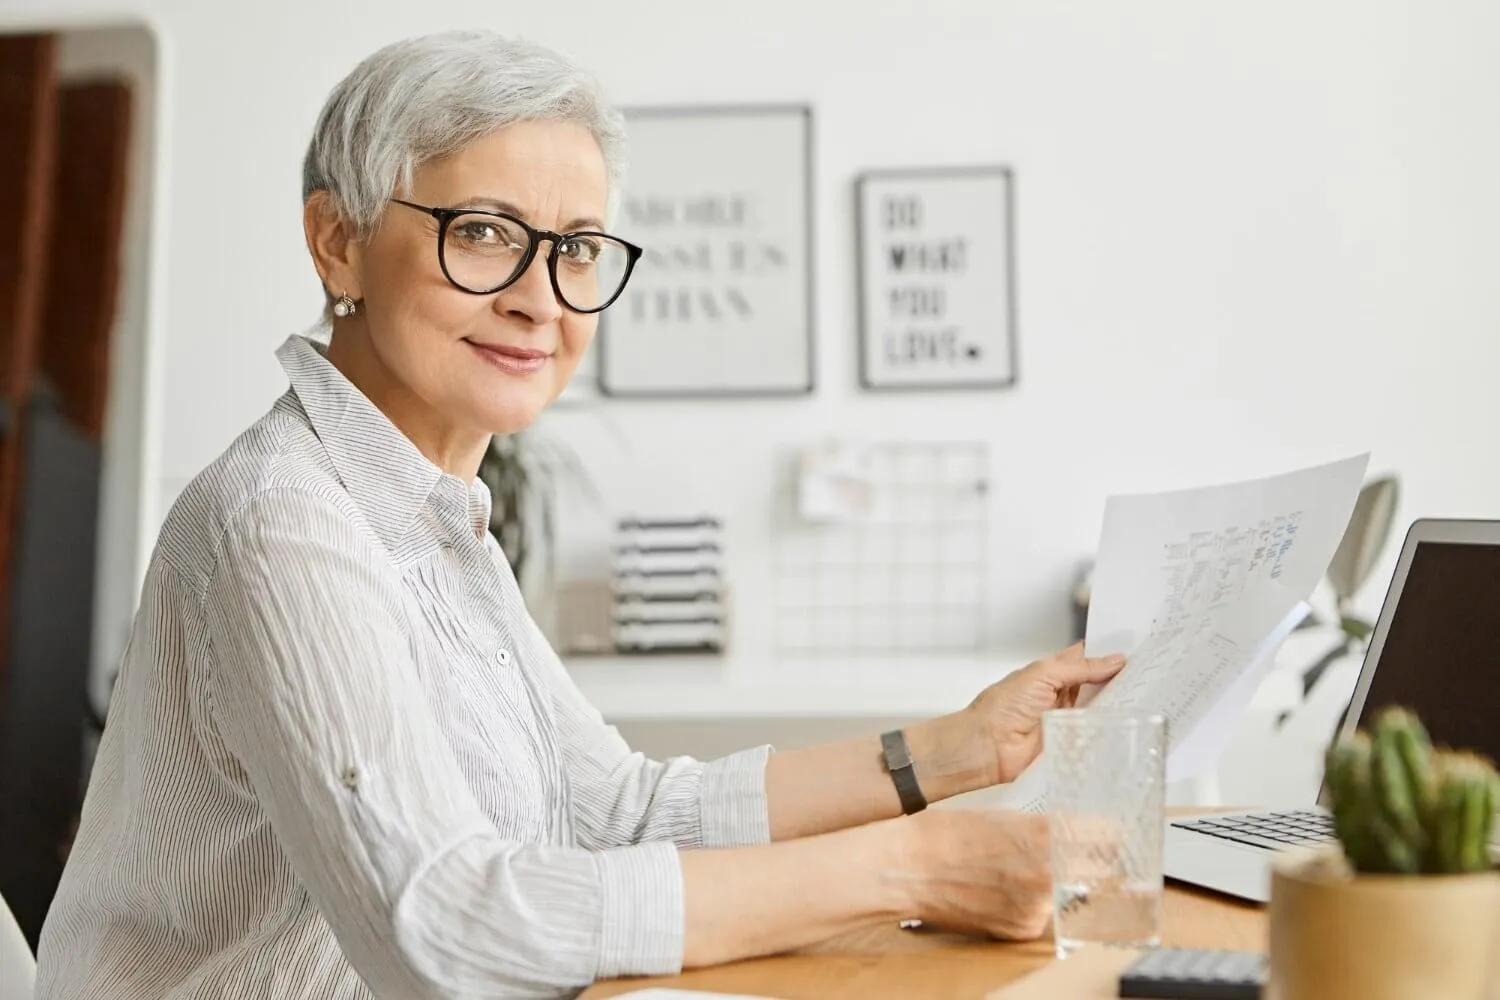 beautiful-successful-confident-mature-businesswoman-with-short-gray-hair-working-her-office-using-portable-computer-holding-papers-her-hands-studying-financial-report-smiling